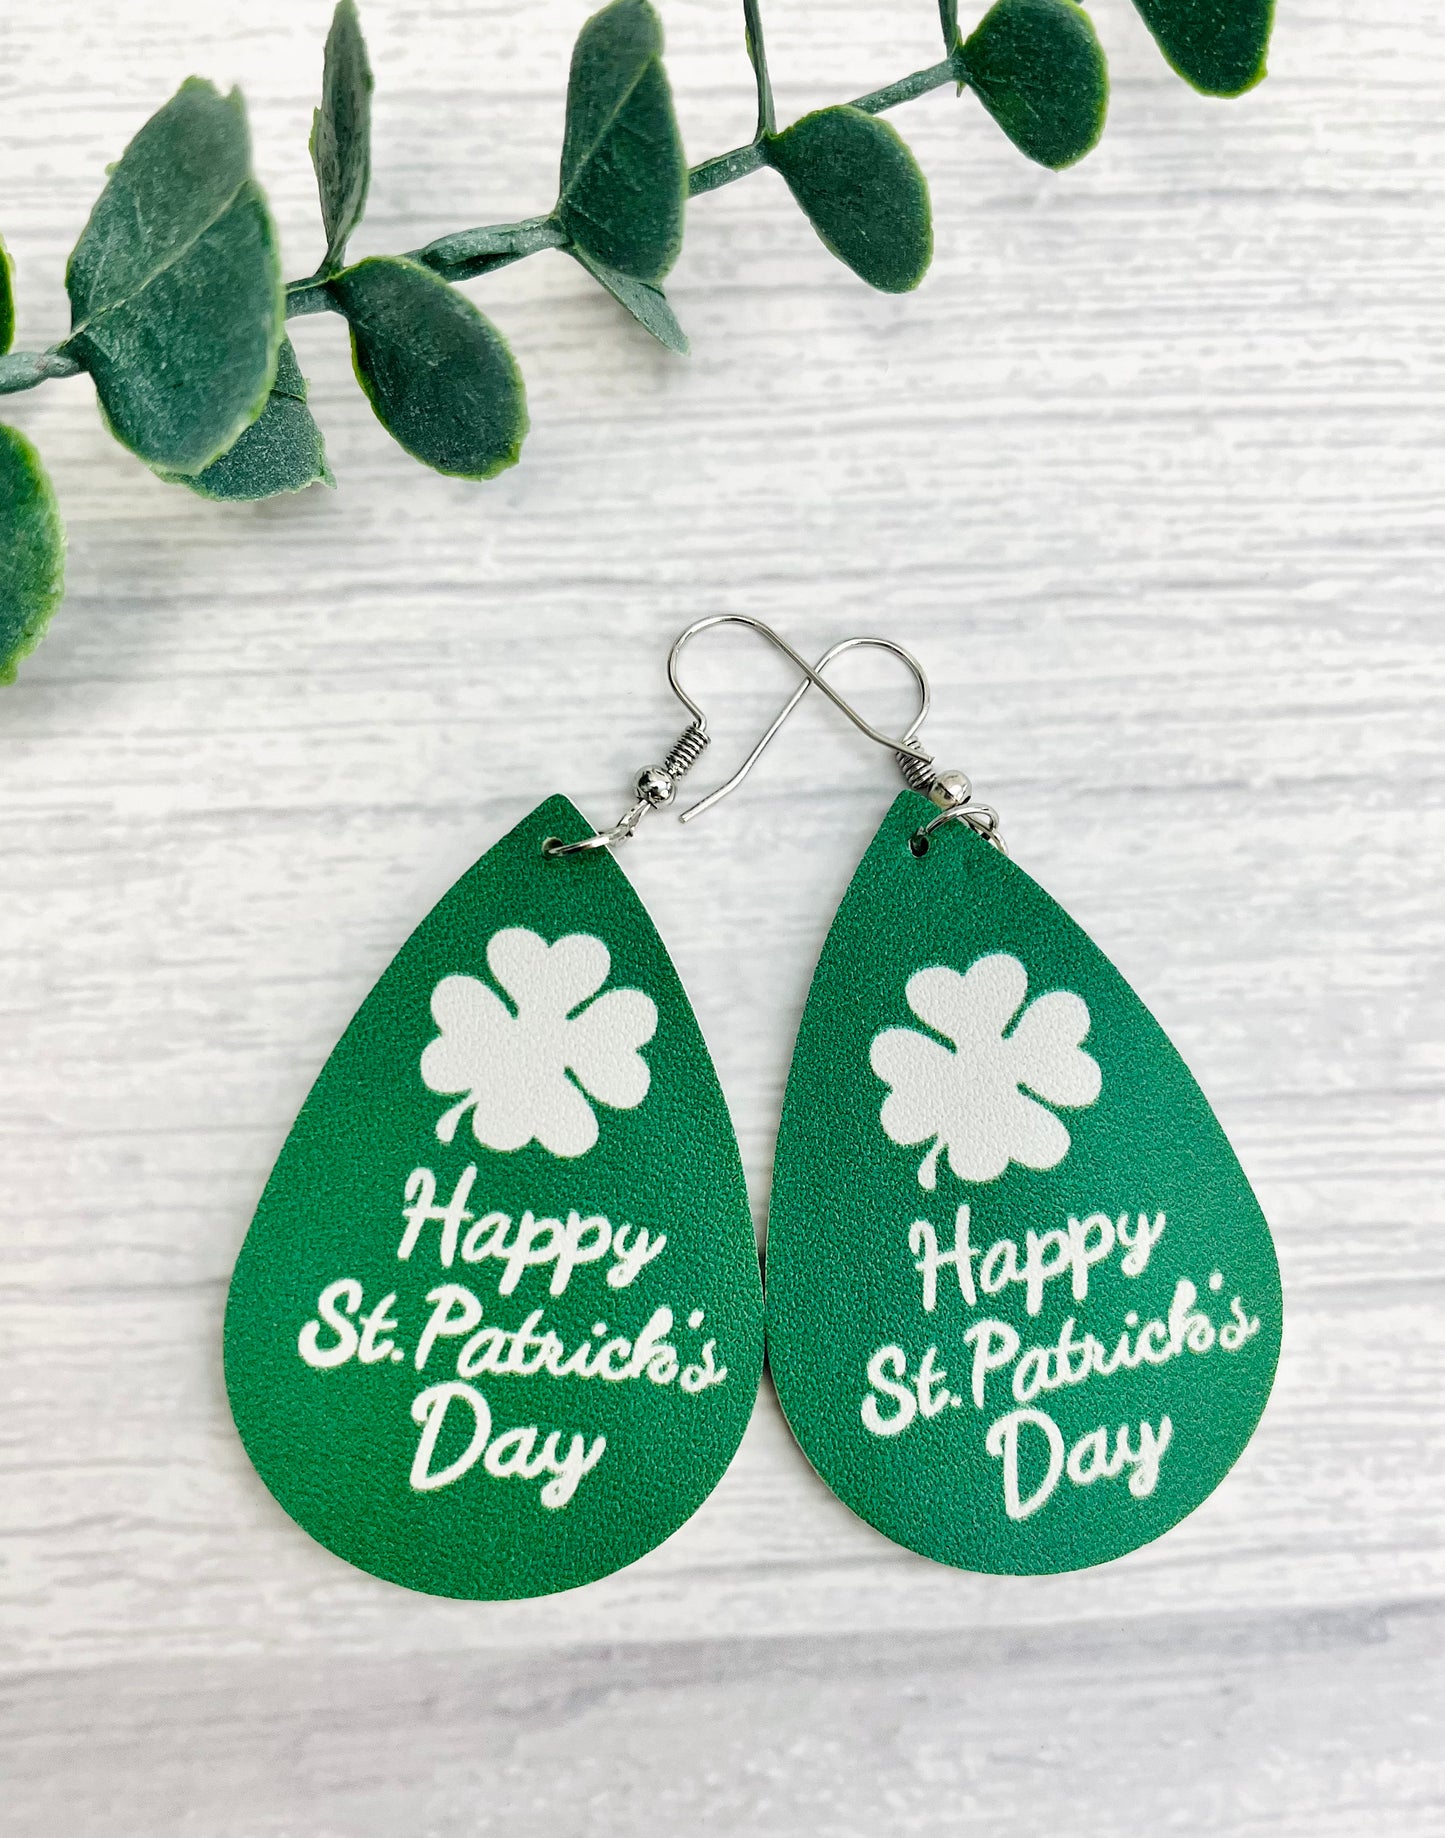 Happy St. Patrick's Day Green Leather Hanging Earrings